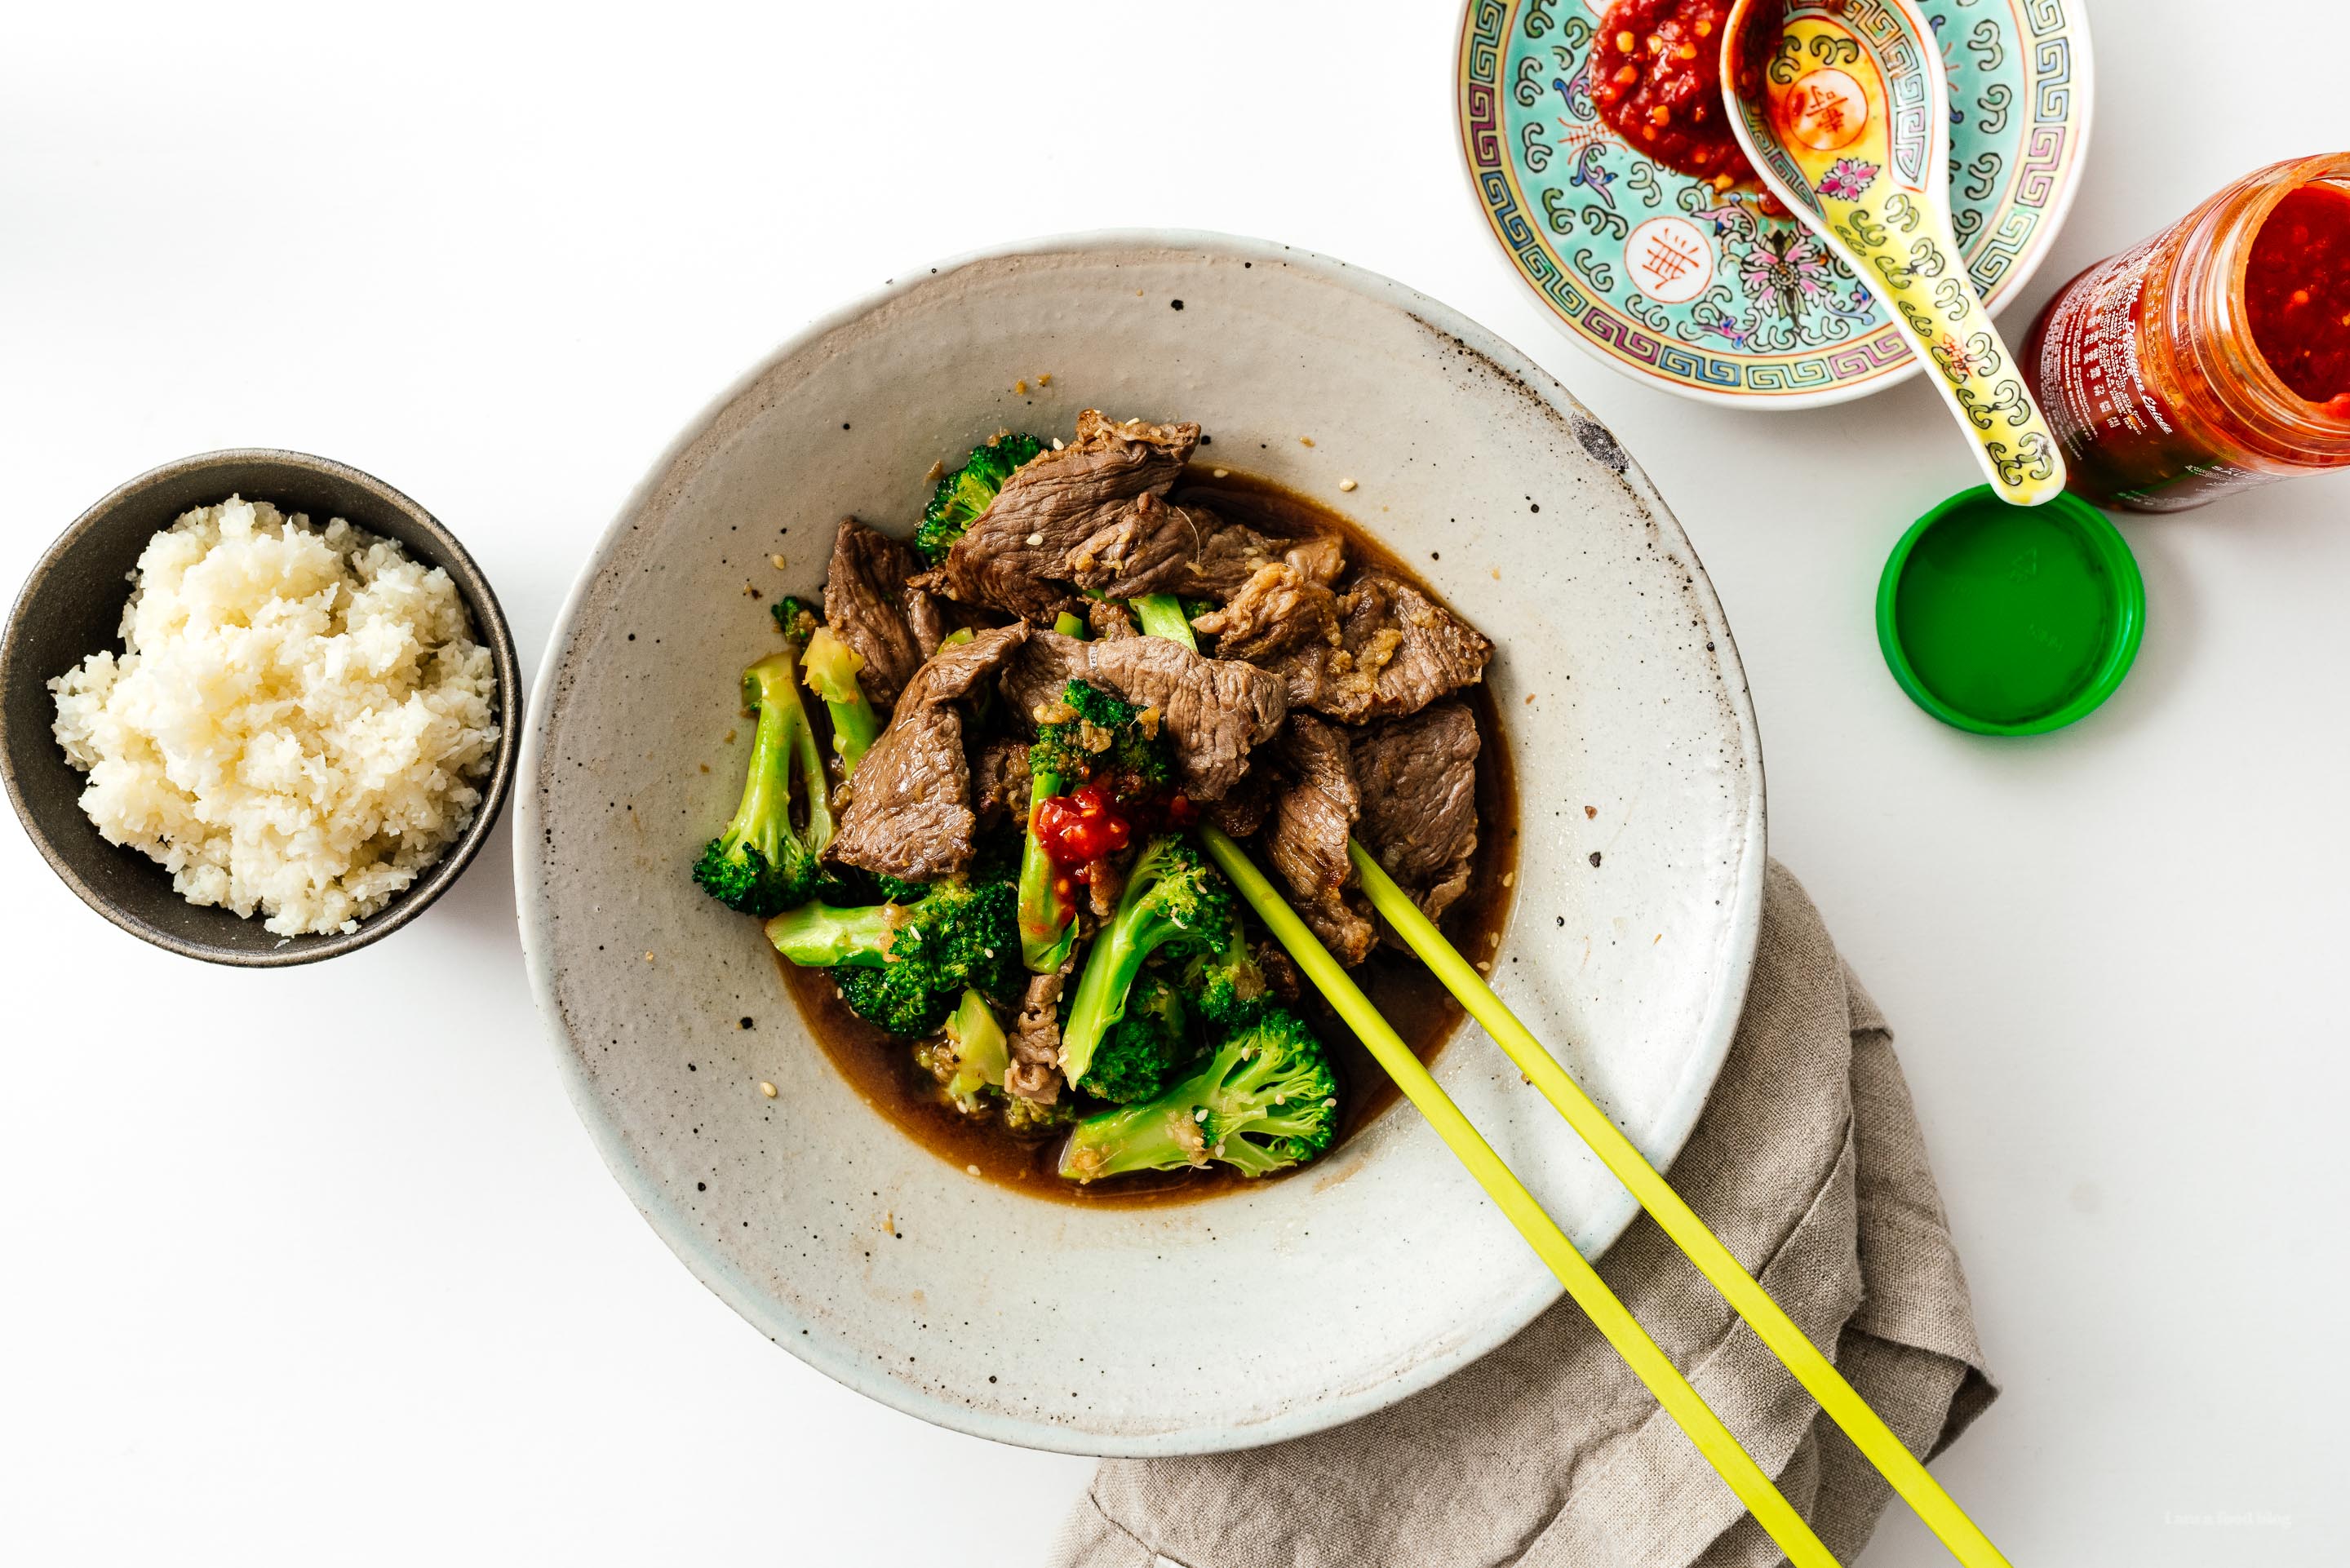 Easy Keto Friendly Low Carb Beef and Broccoli Stir Fry